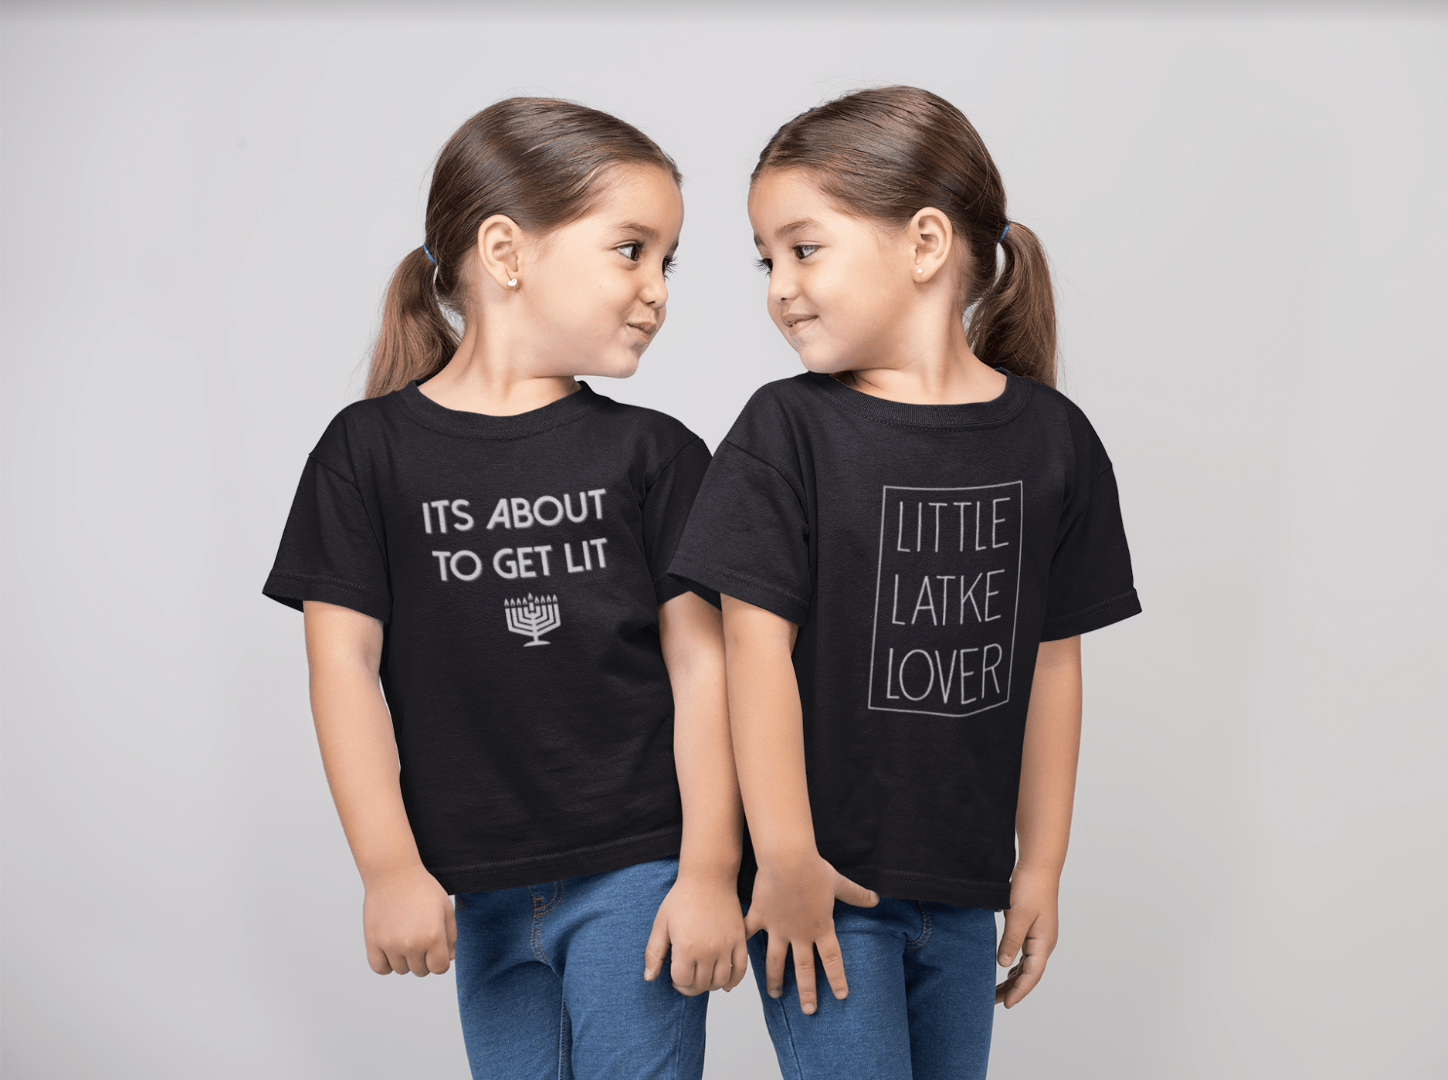 Challah Day Shop Kid Clothing It's About to Get Lit T-Shirt - Baby and Kid Sizes